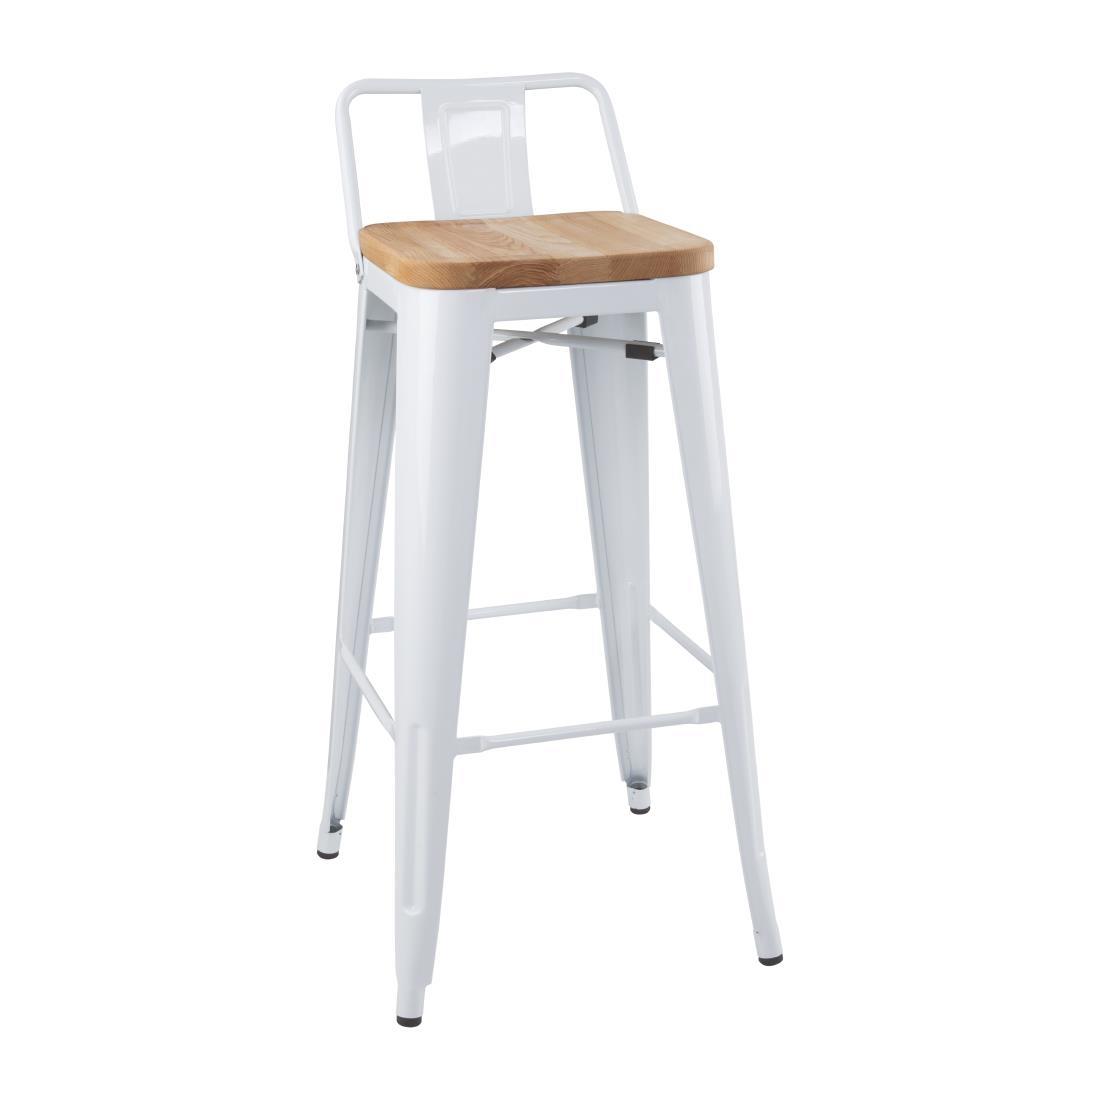 Bolero Bistro Backrest High Stools with Wooden Seat Pad White (Pack of 4) - FB625  - 1